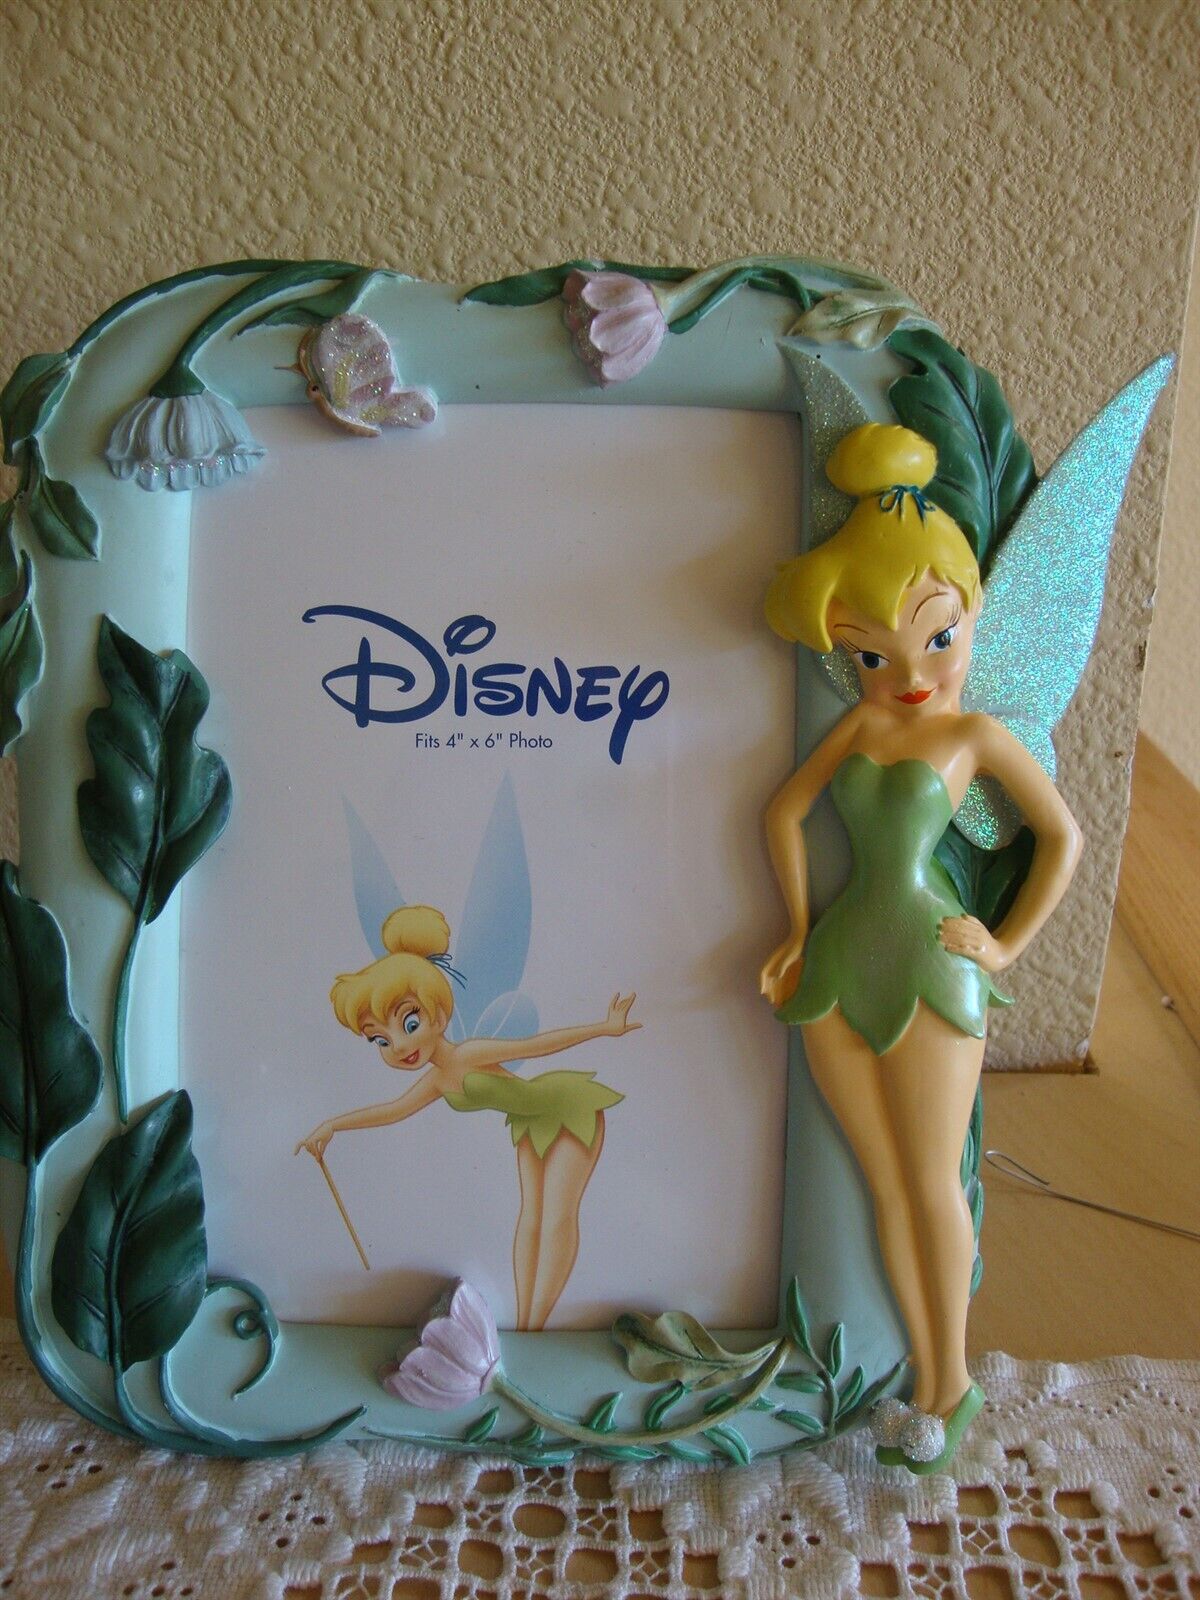 Enesco DISNEY TINKERBELL FAIRY Photo Picture frame Holds 4x6 Easel Stand NEW